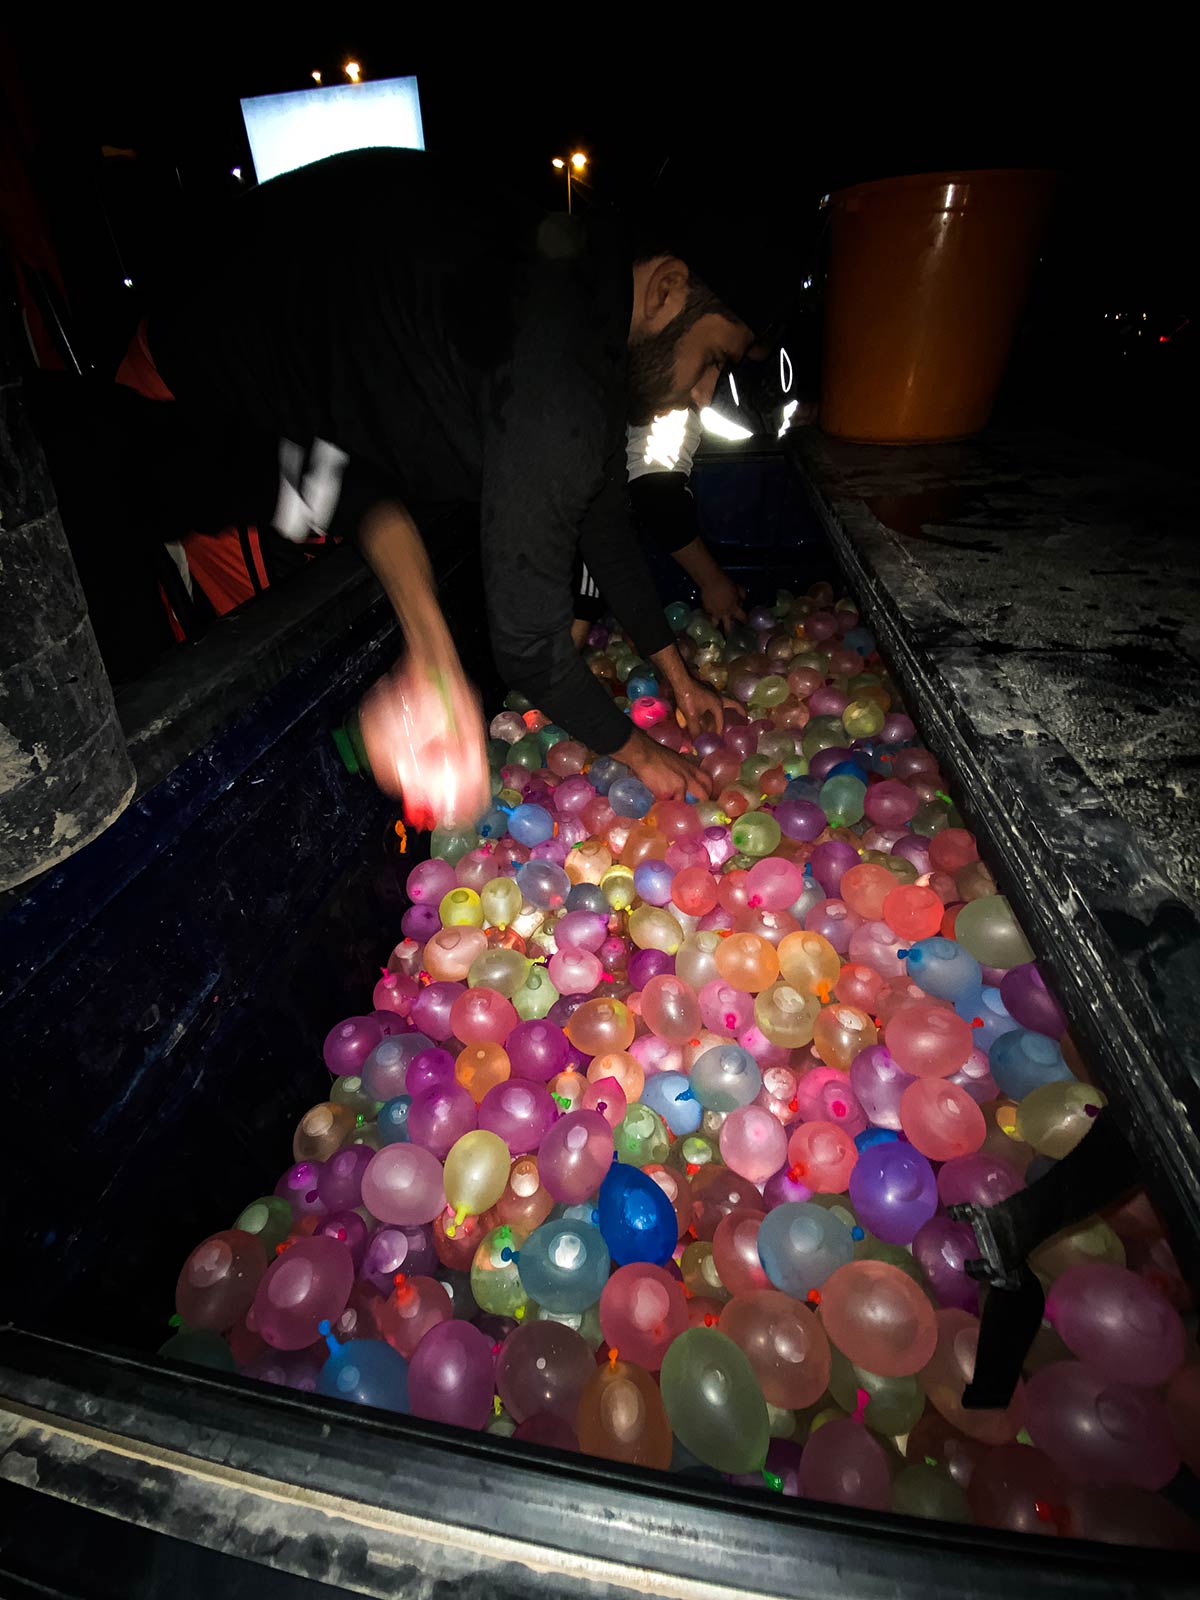 Local guy preparing his water balloons in Kuwait. The most insane waterfight in the world